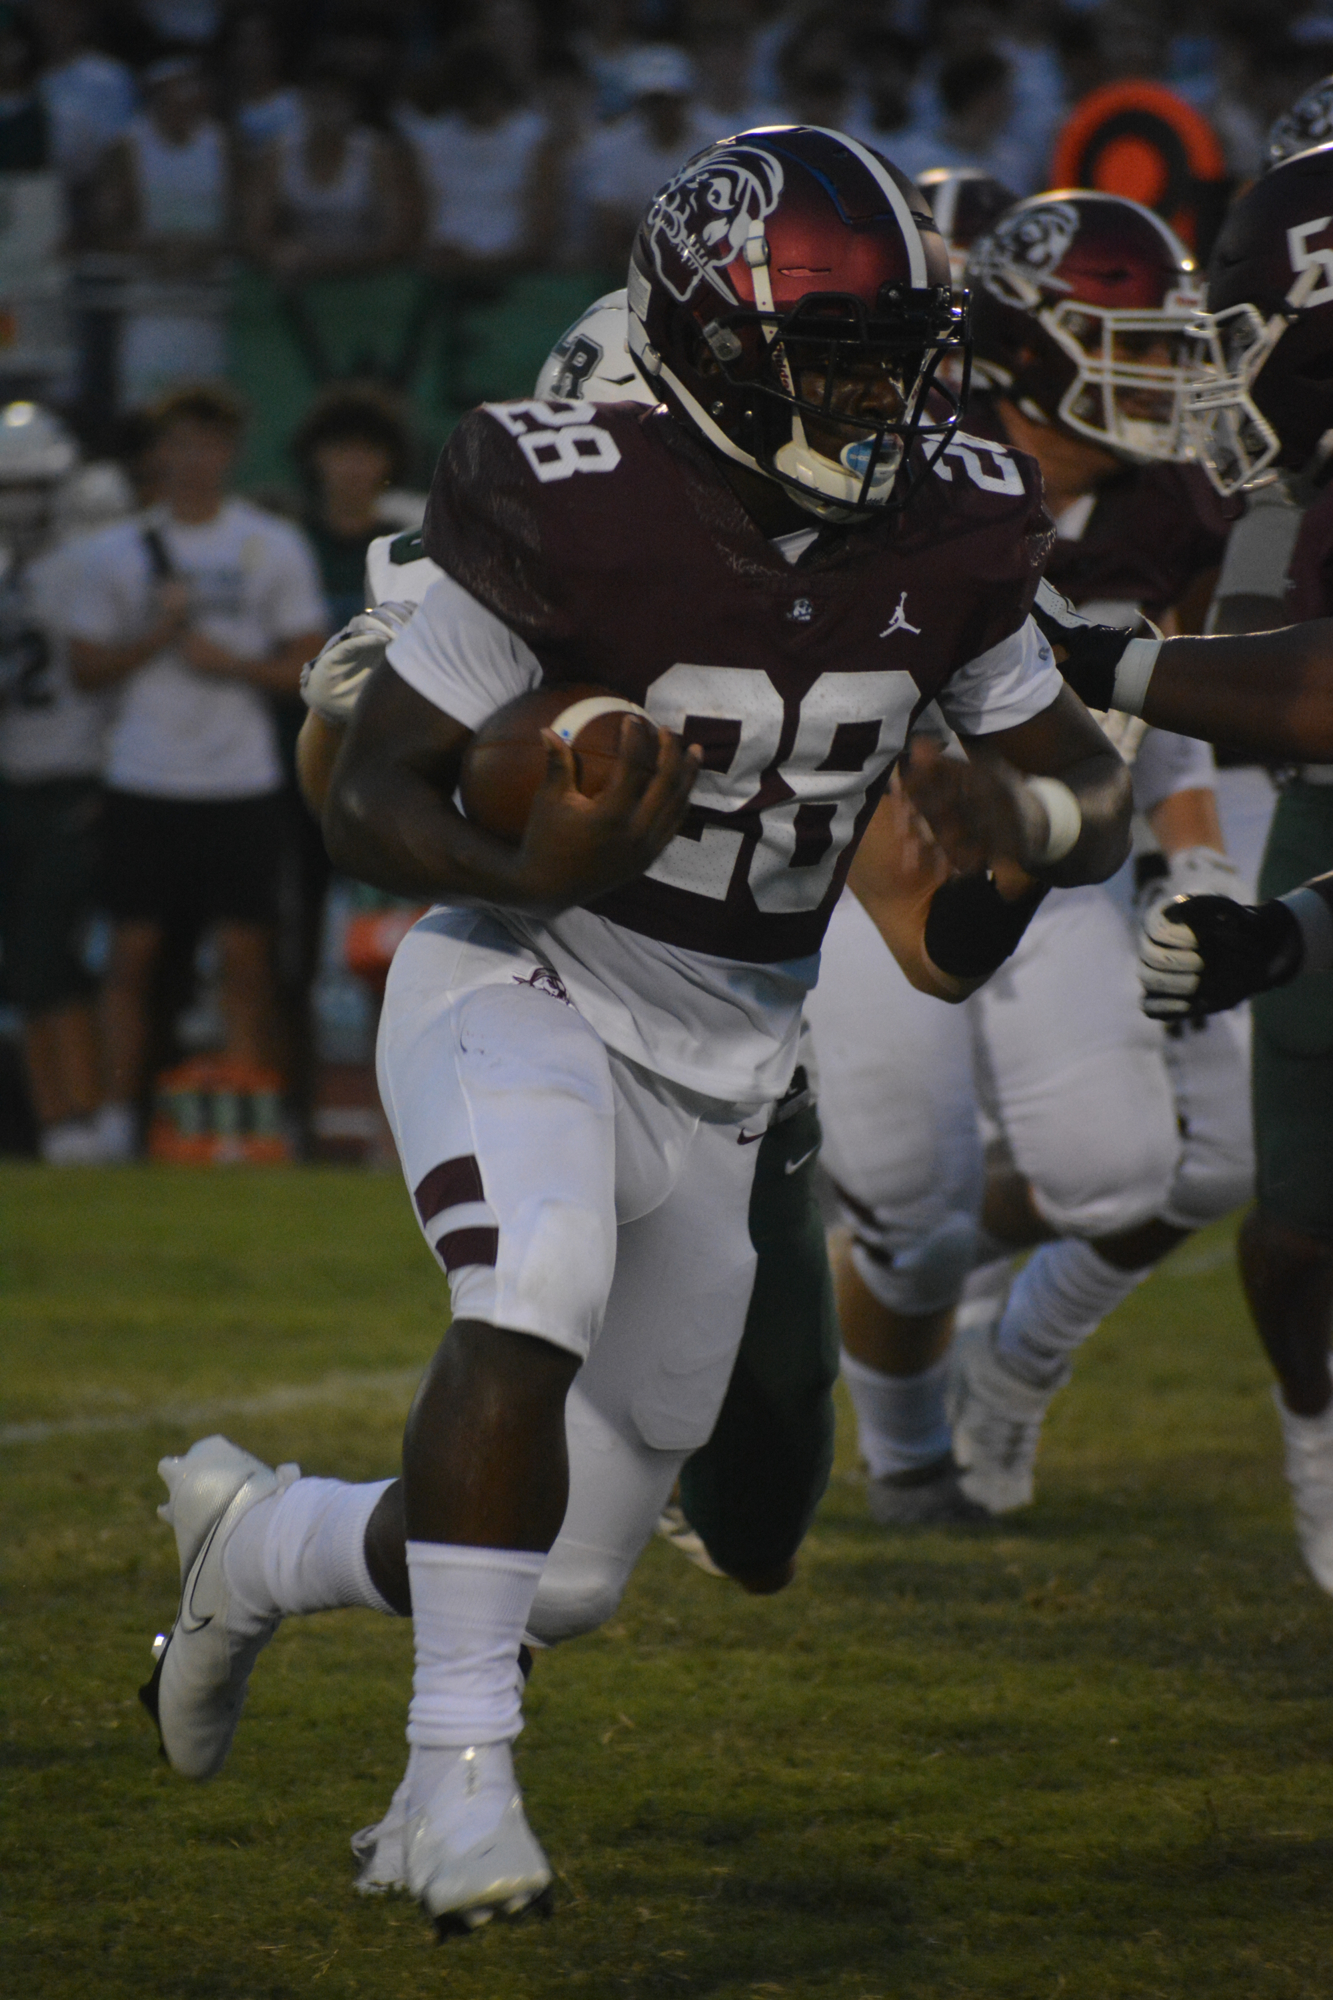 6. Braden River sophomore Trayvon Pinder filled a hole at running back for the Pirates in 2021.